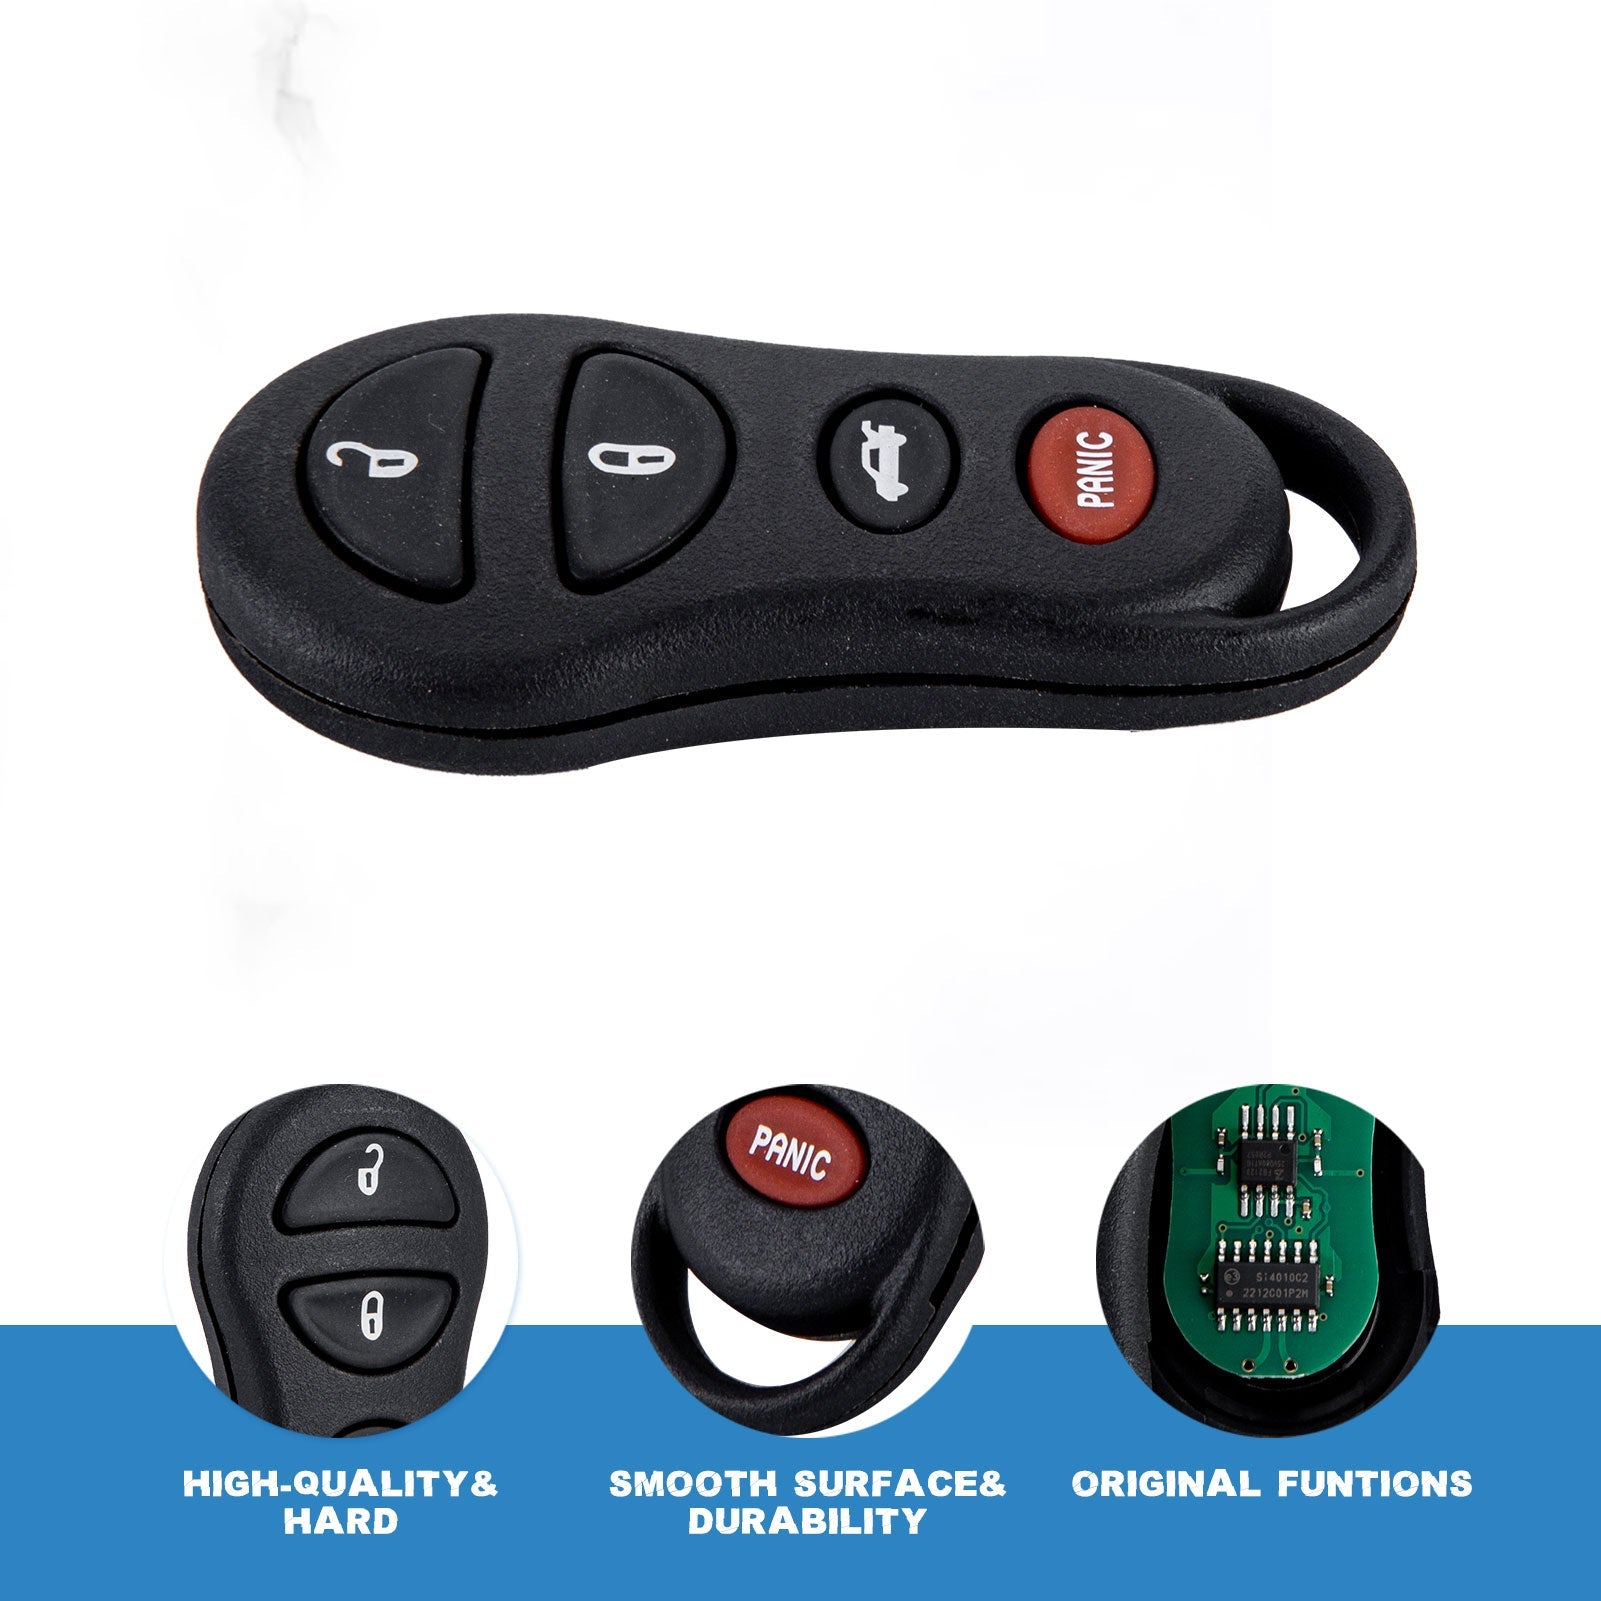 Car Key Fob Keyless Entry Remote Control Replacement for 2001-2006 Sebring 2003-2009 Viper GQ43VT17T  KR-D4RD